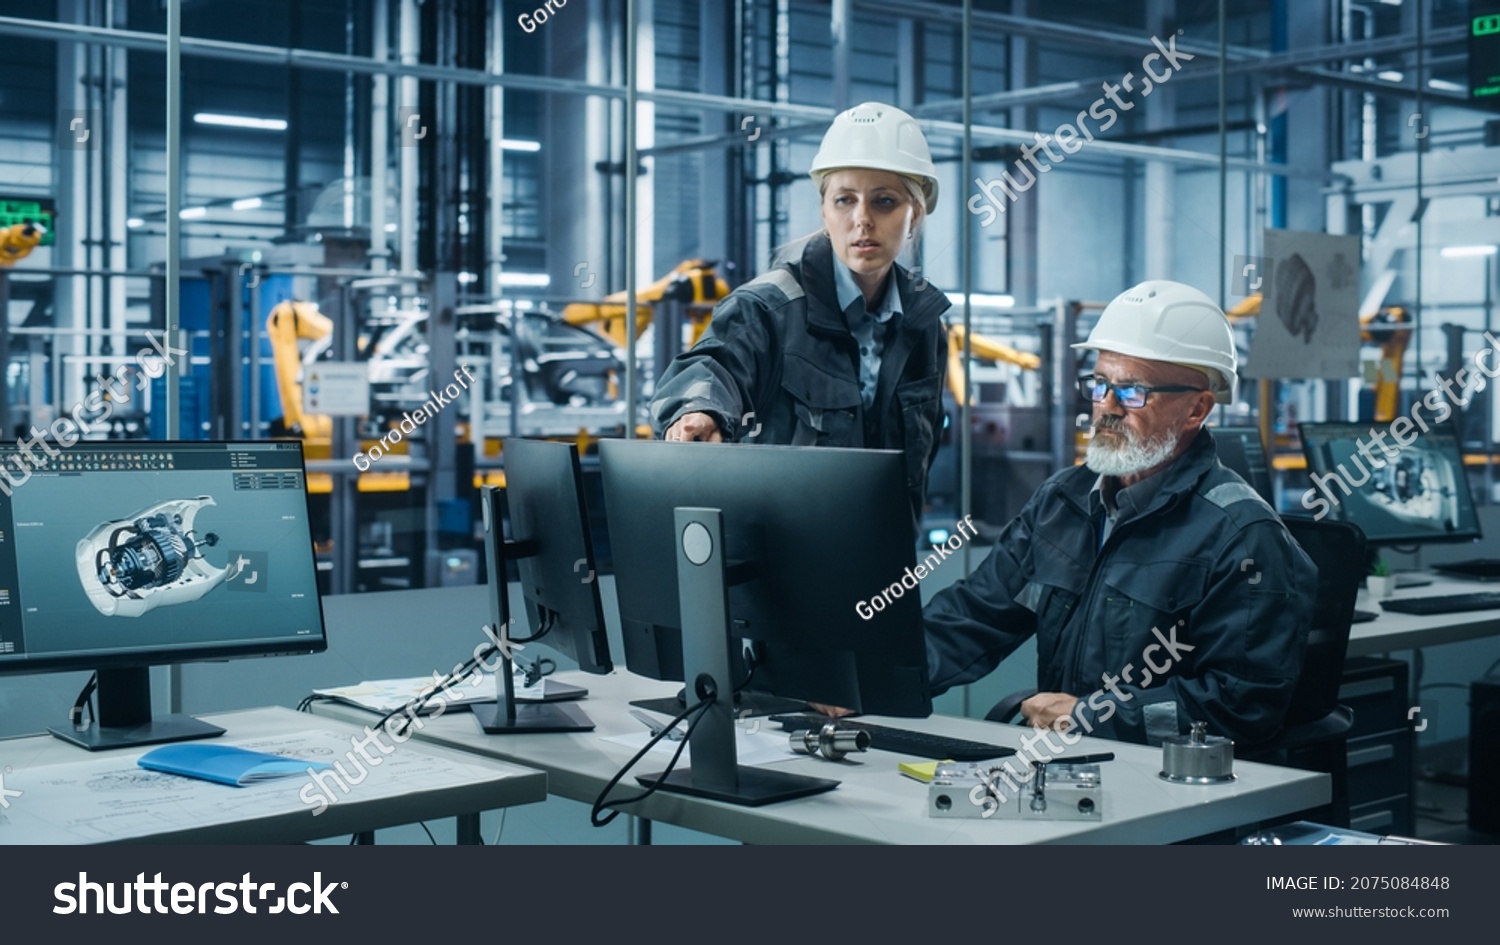 Car Factory Office: Female Manager Talks to Male Automotive Engineer Working on Computer. Automated Robot Arm Assembly Line Manufacturing Electric Vehicles. Technicians Monitoring Conveyor Production #2075084848